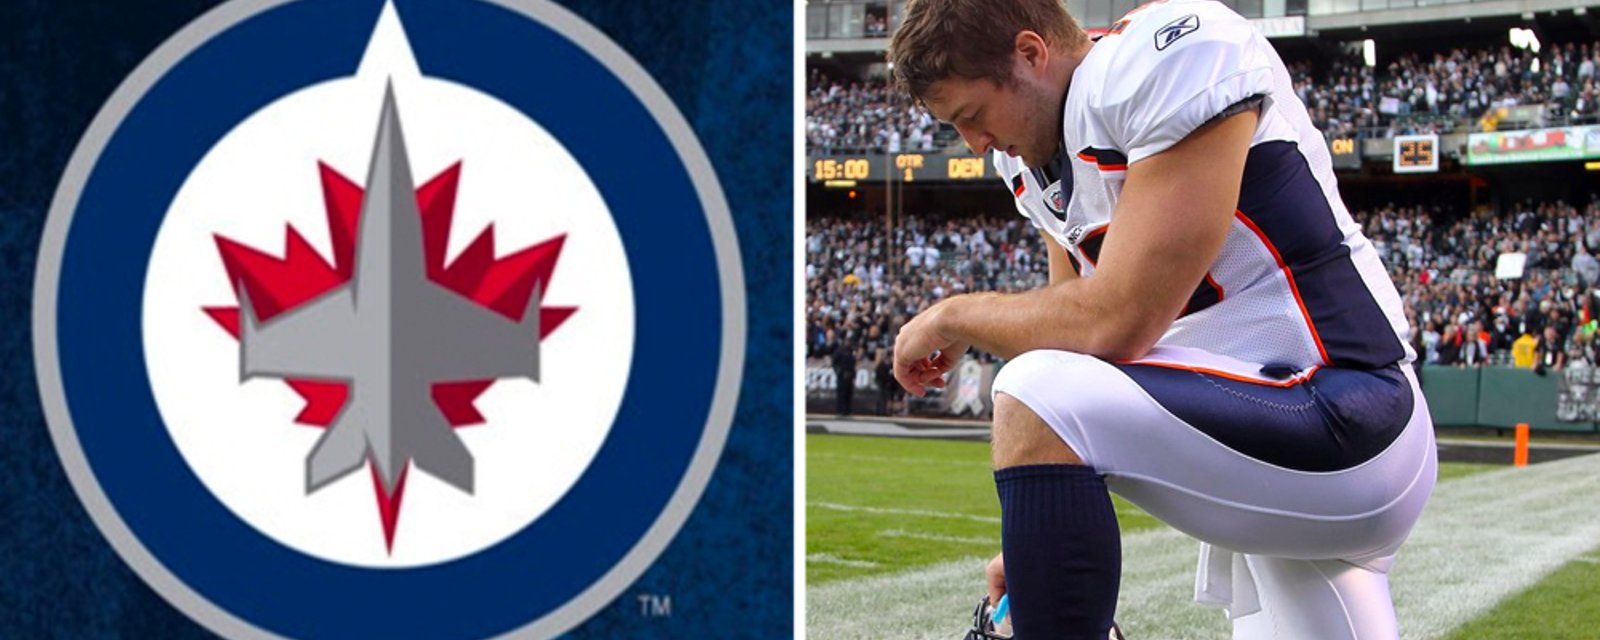 ICYMI: Tim Tebow officially becomes part of the Winnipeg Jets' organization